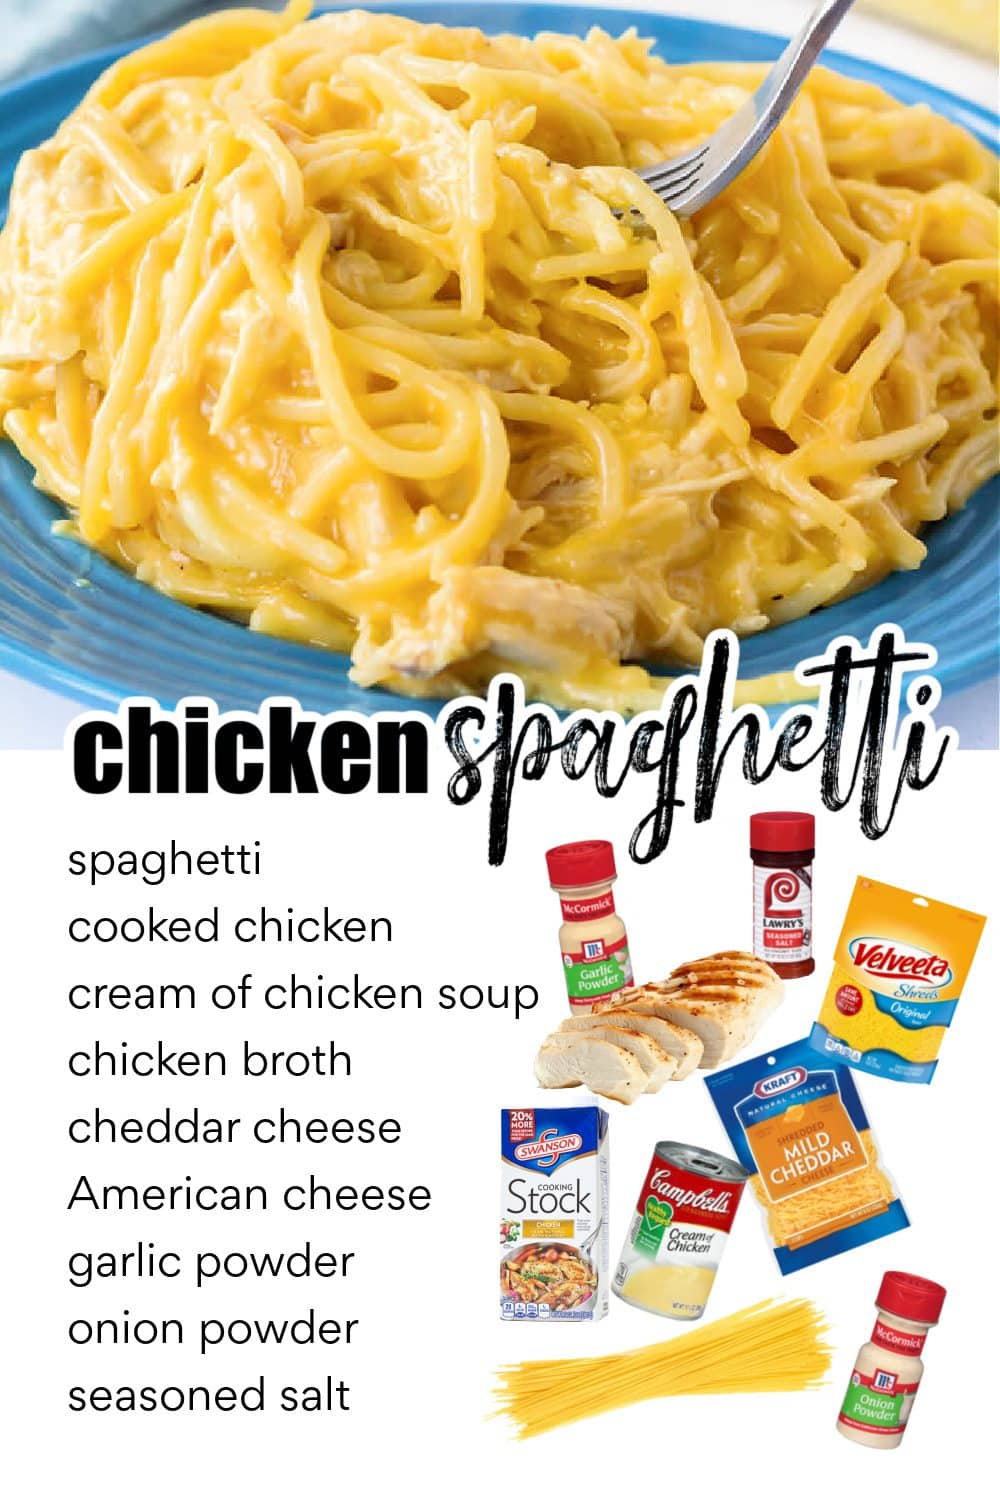 A vibrant image featuring a blue plate of creamy chicken spaghetti, perfect for busy families, and illustrated ingredients like chicken, soup, cheese, broth, and spices, with text labels describing each component.